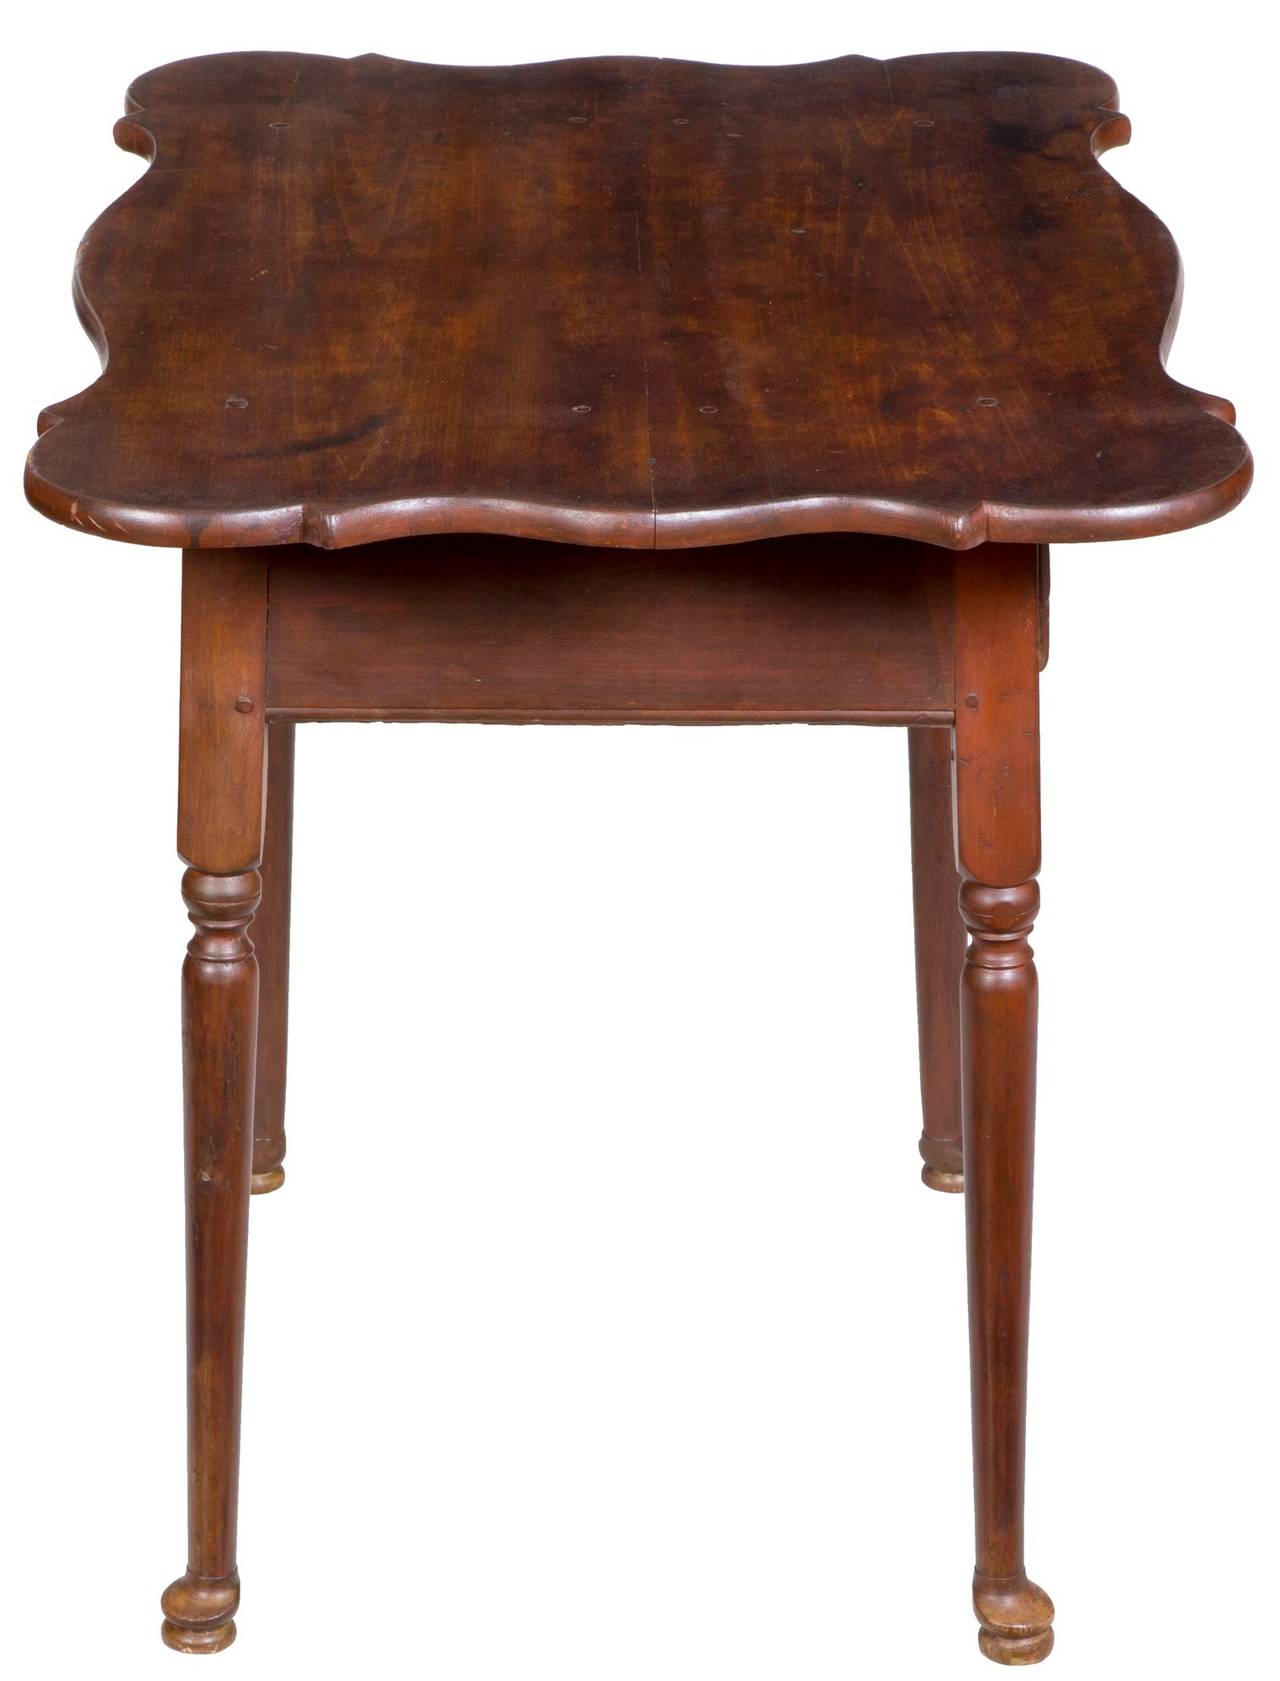 American Rare Porringer Top Queen Anne Side Table with Single Drawer, circa 1750-1760 For Sale